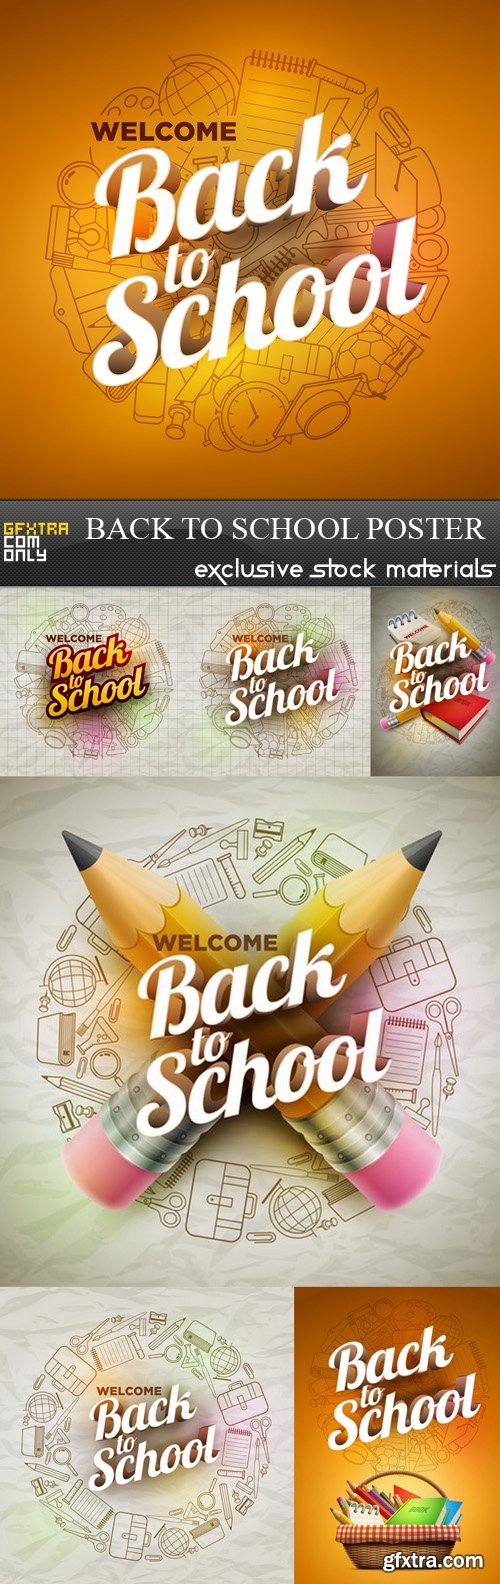 Back to School Poster - 7 EPS